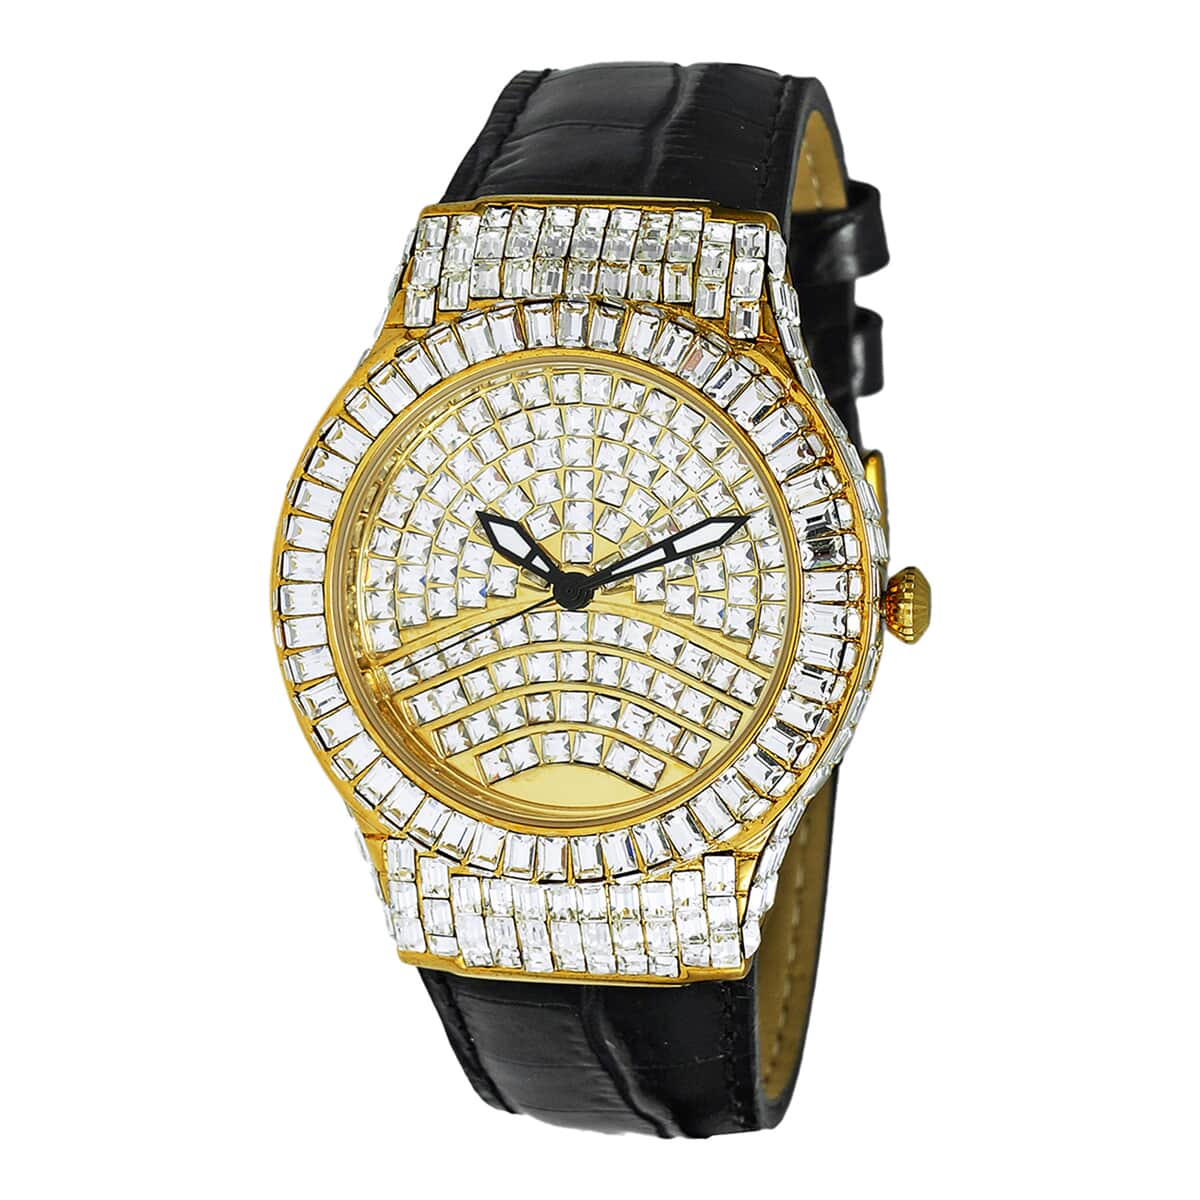 ADEE KAYE Austrian Crystal Japan Quartz Movement Goldtone Dial Watch in Black Leather Band (26 mm) image number 0